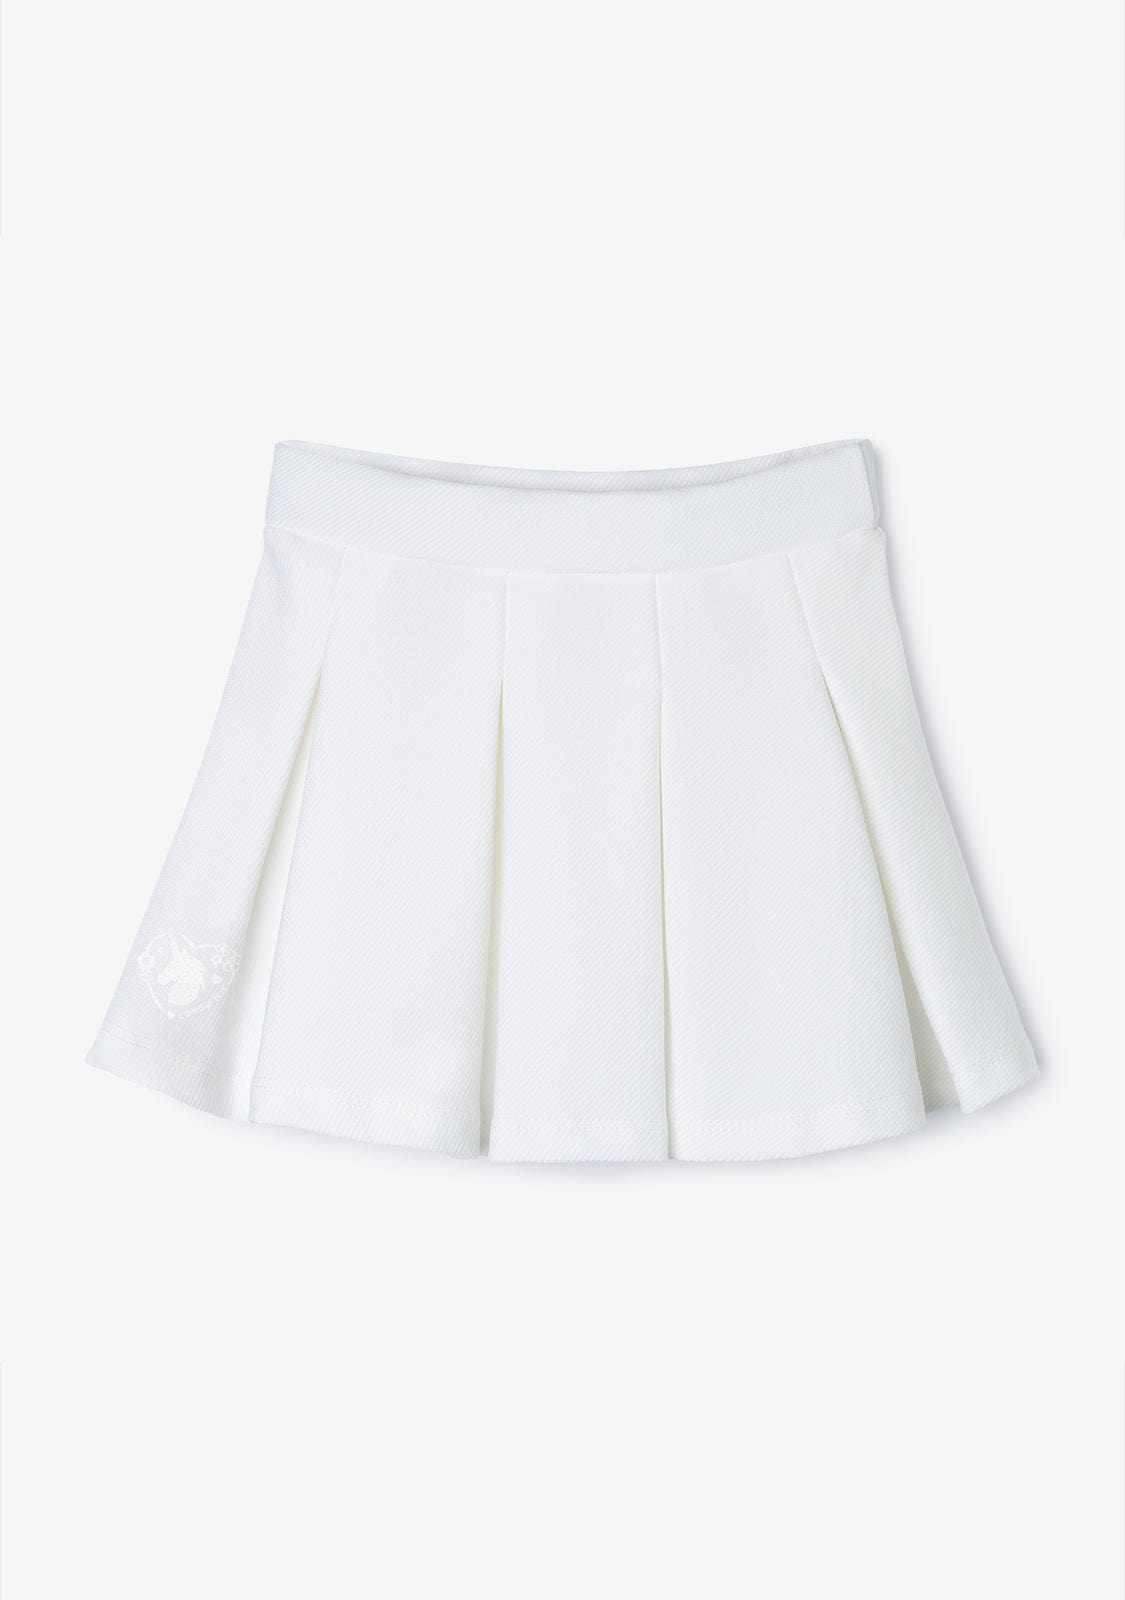 CONGUITOS TEXTIL Clothing Girl´s White Box Pleat Skirt